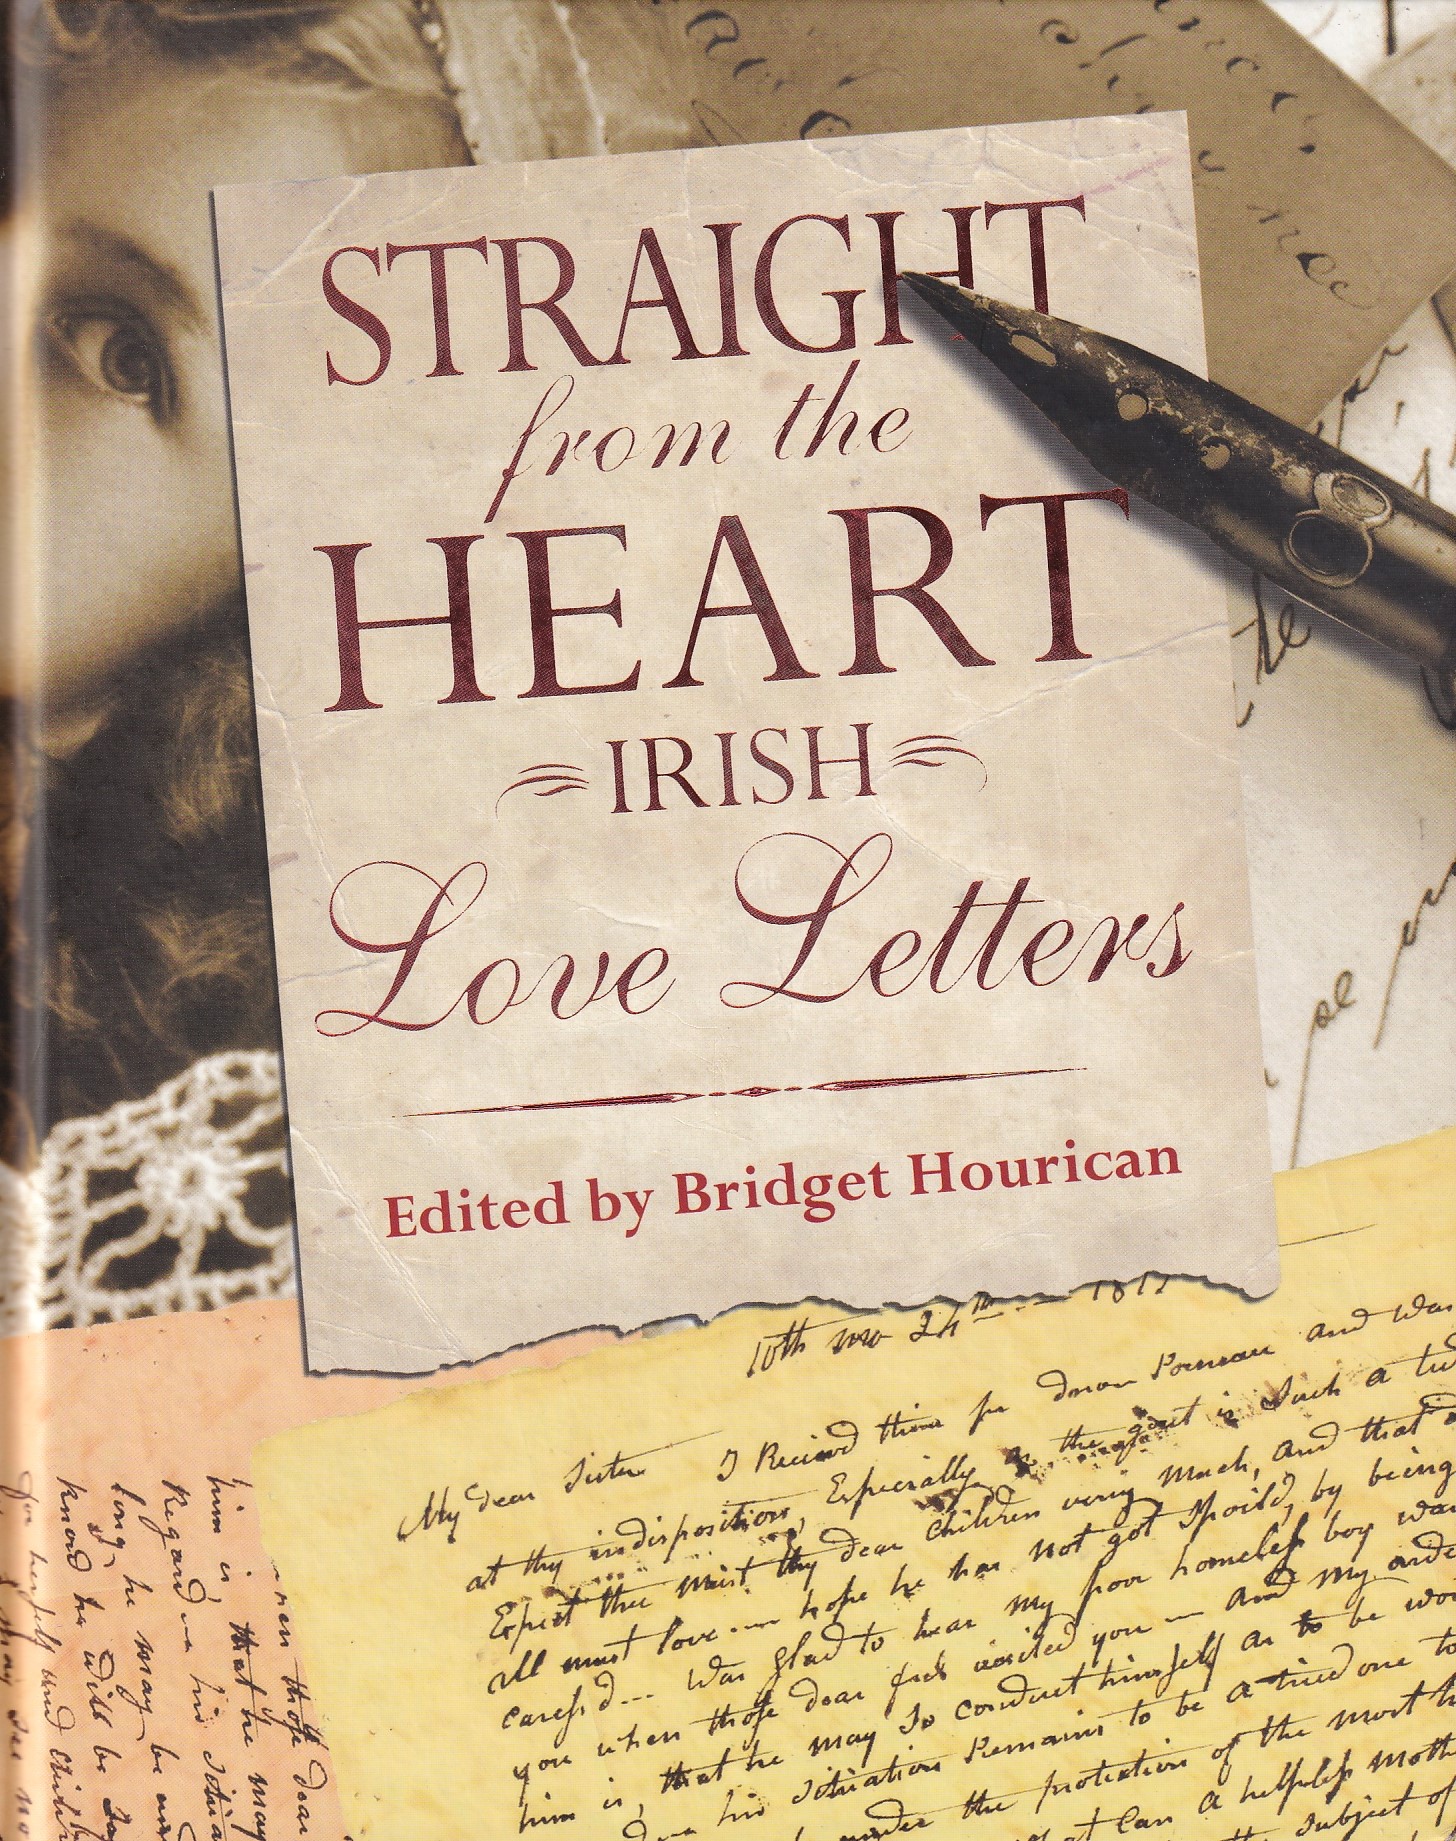 Straight from the Heart: Irish Love Letters | Bridget Hourican | Charlie Byrne's